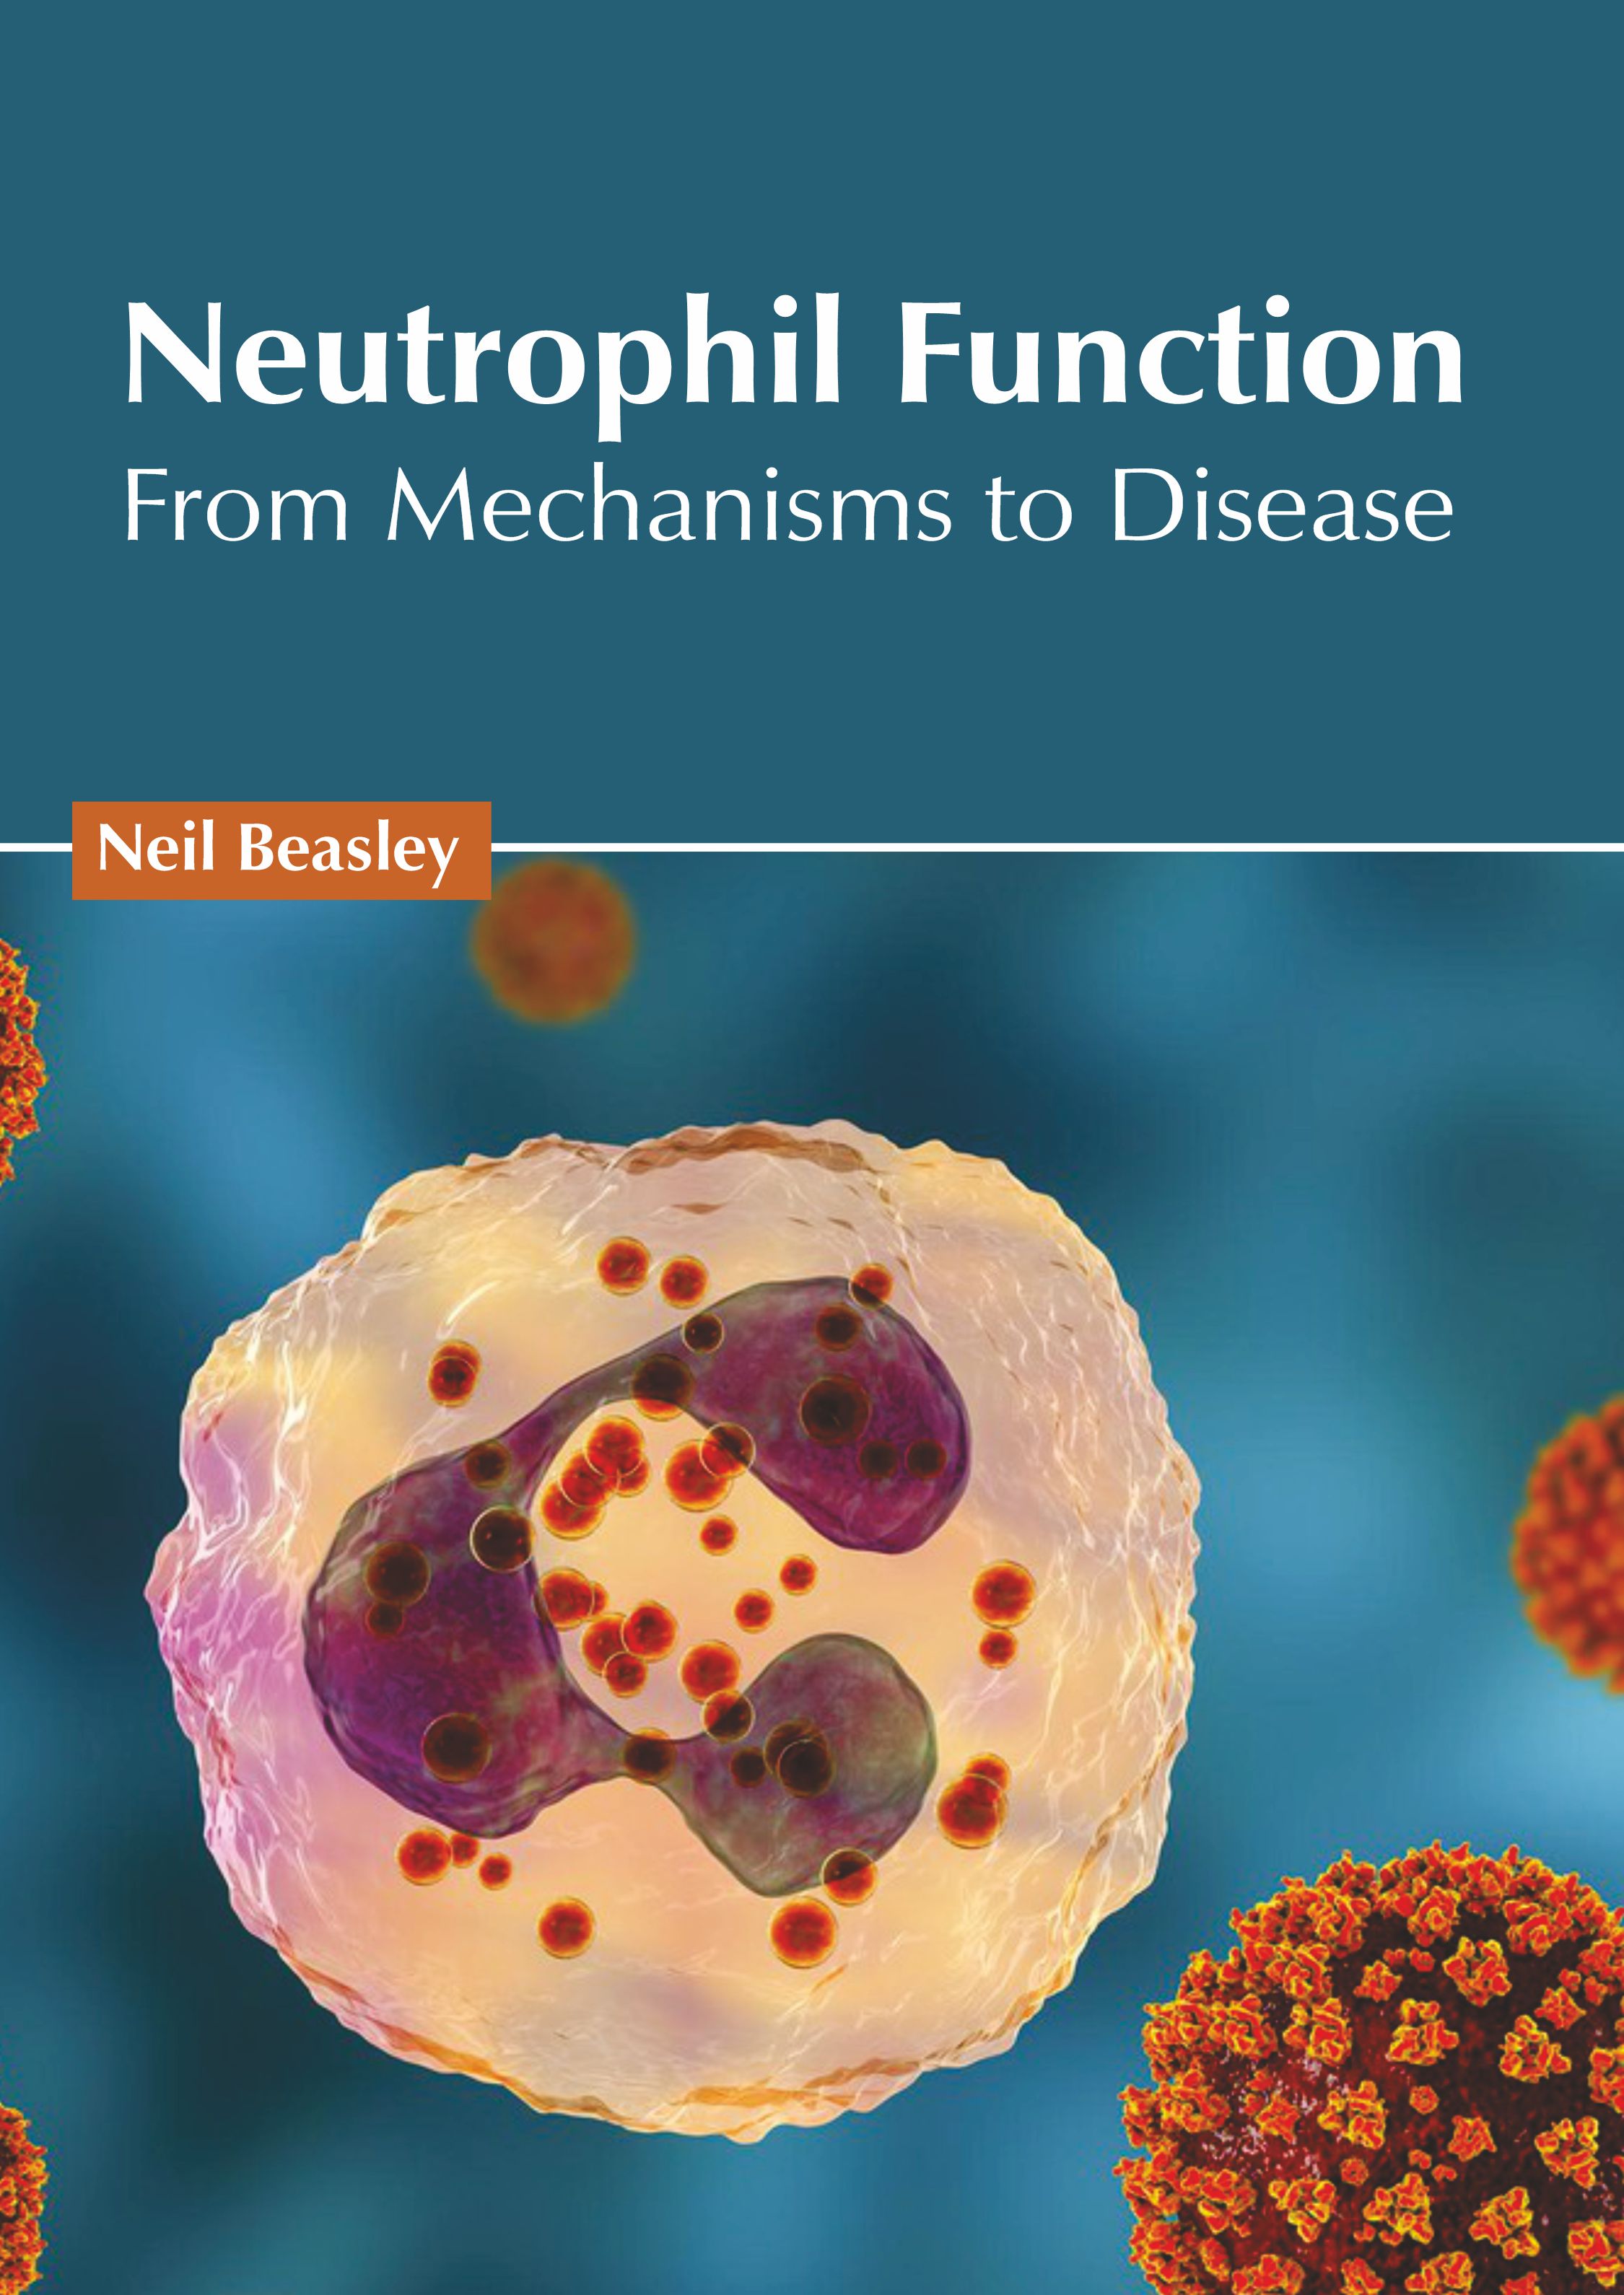 NEUTROPHIL FUNCTION: FROM MECHANISMS TO DISEASE